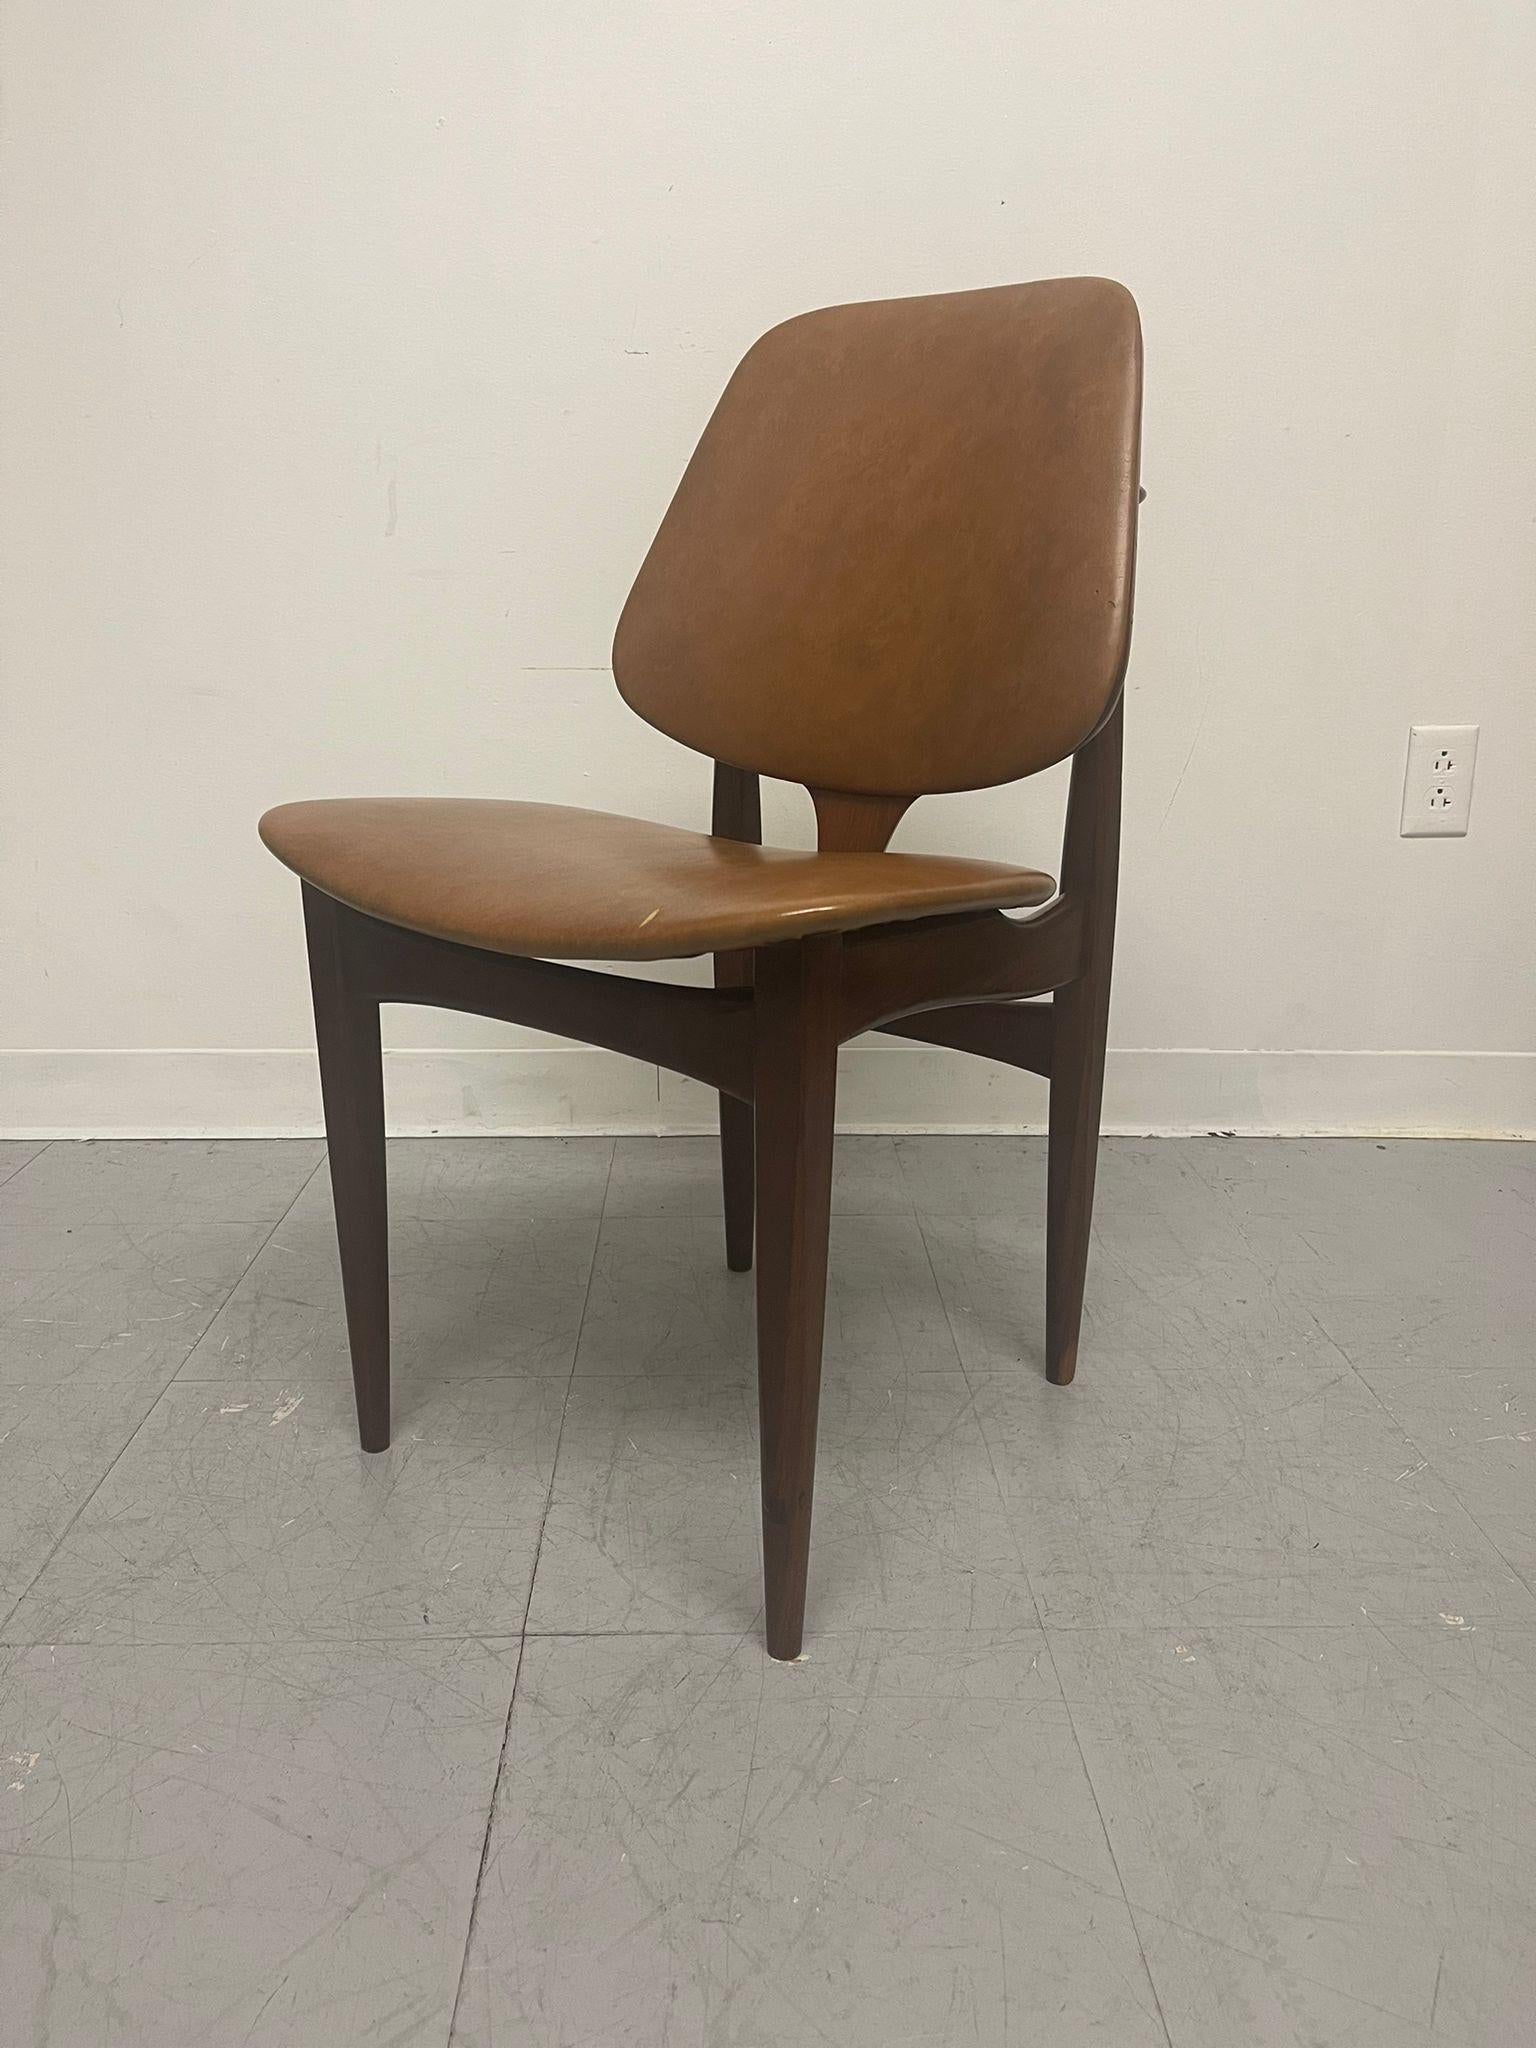 Vintage Mid Century Modern Walnut Toned Chair. In Good Condition For Sale In Seattle, WA